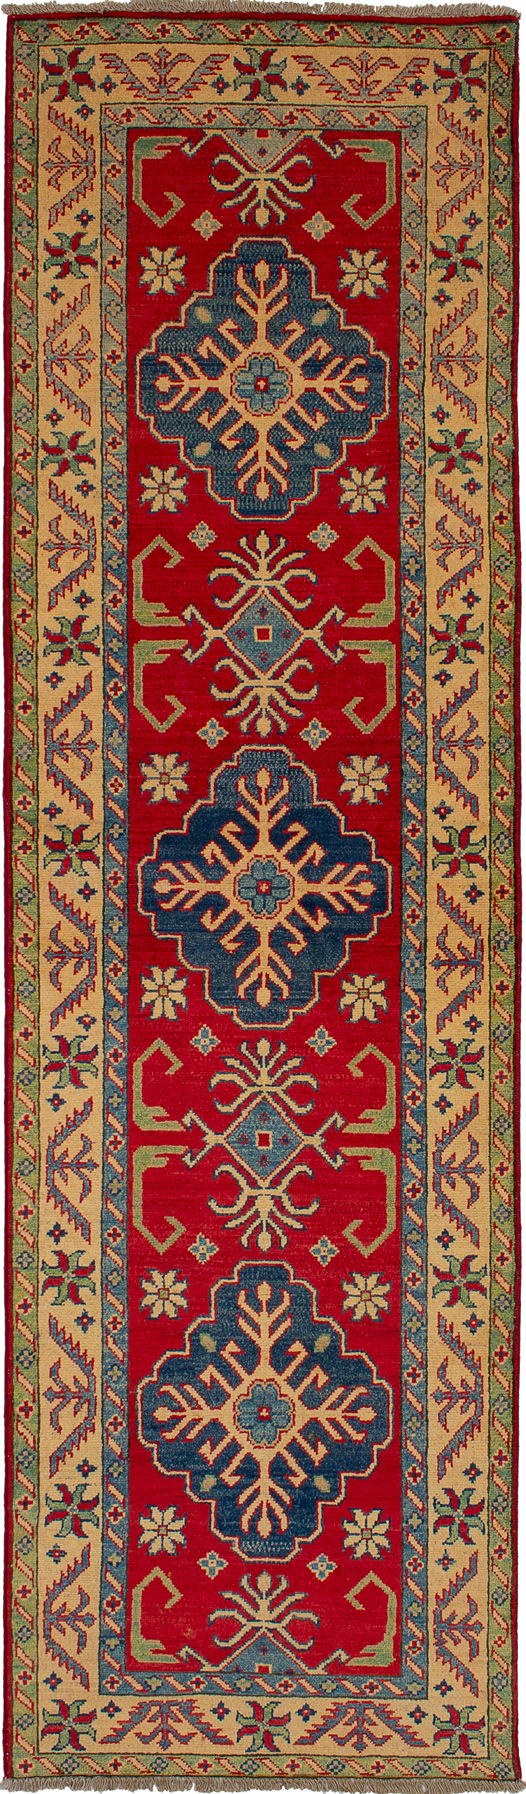 Hand-knotted Finest Gazni Red Wool Rug 2'8" x 9'4"  Size: 2'8" x 9'4"  